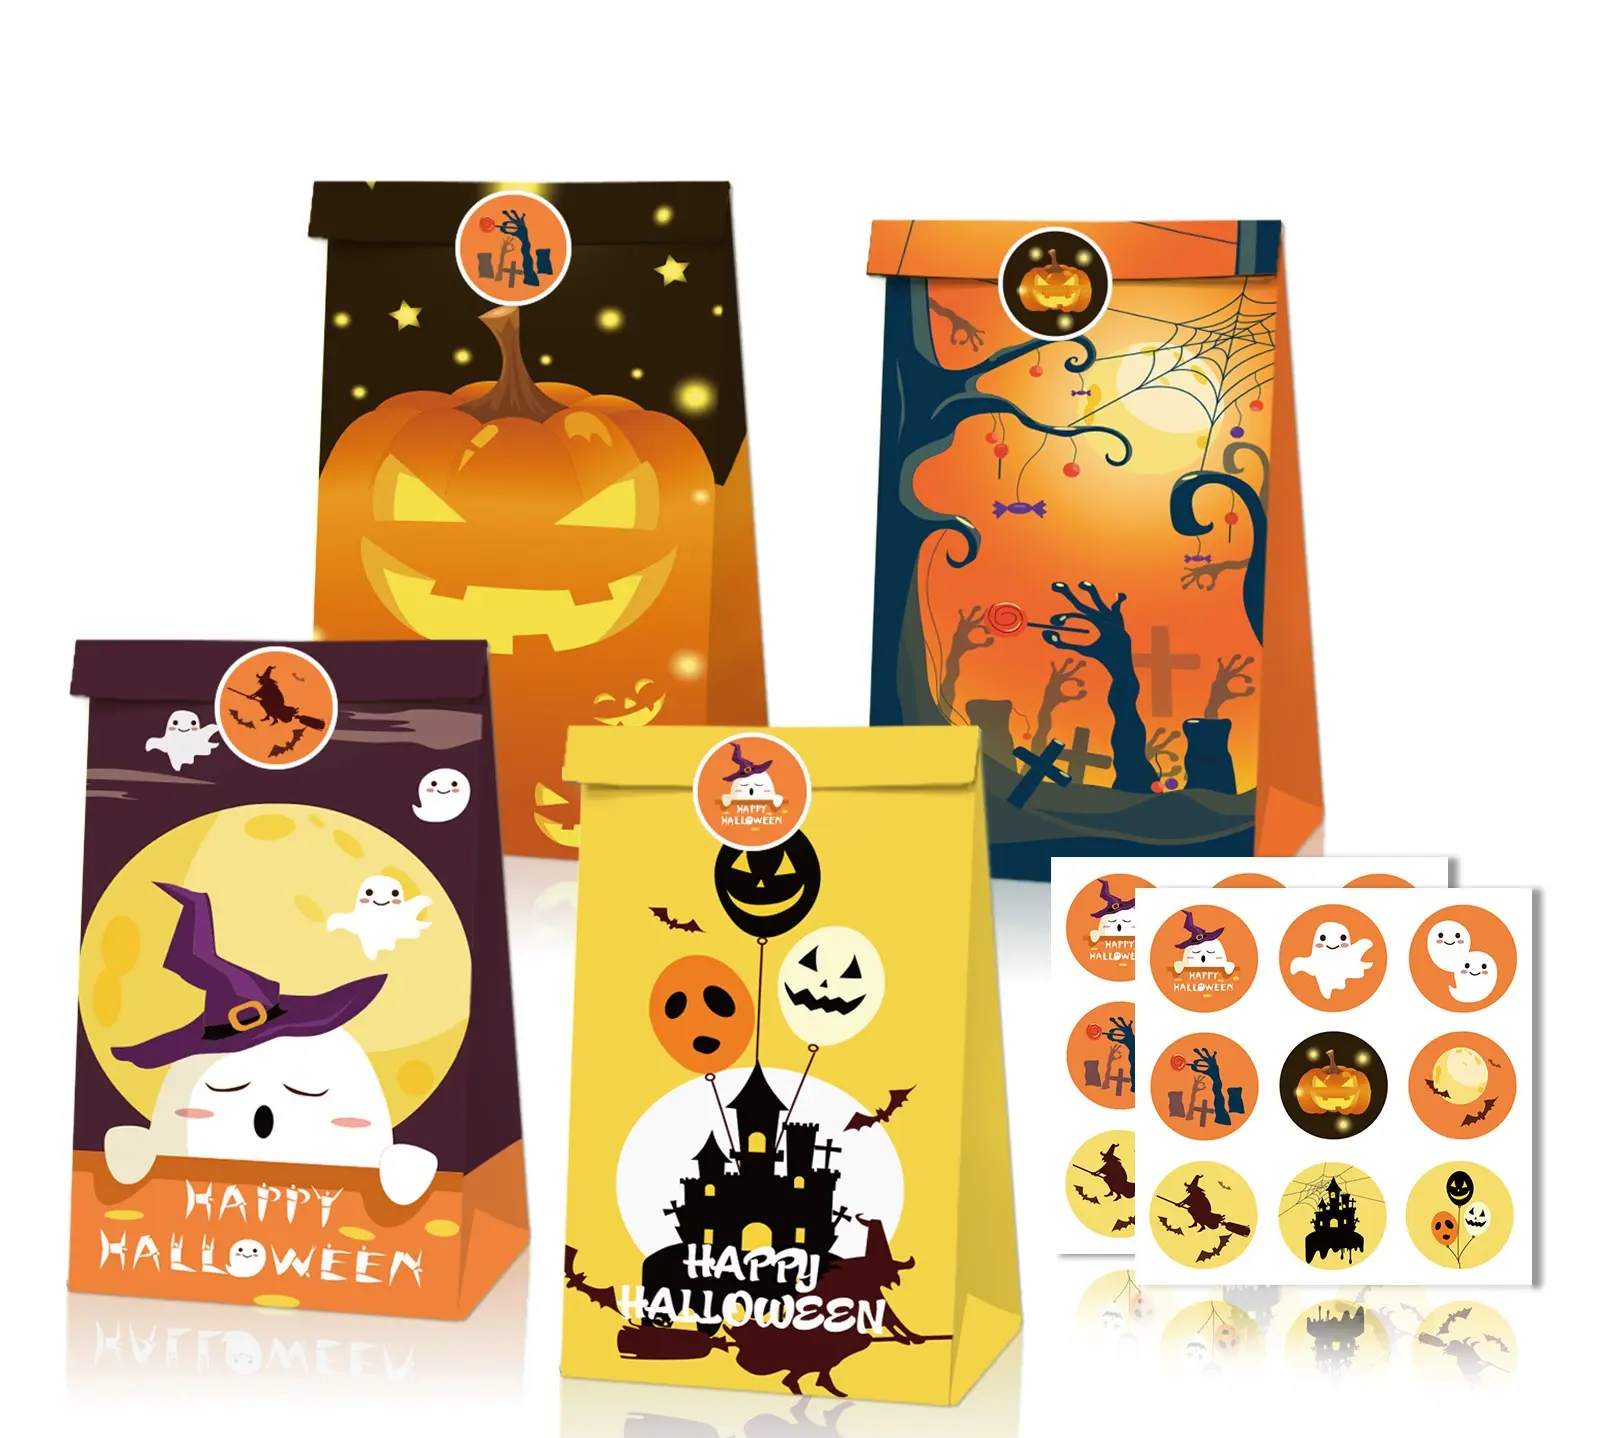 12pcs Halloween Paper Trick Treat Bags with 18pcs Sticker Halloween Party Treat Bags for Kids Birthday Halloween Party Decor